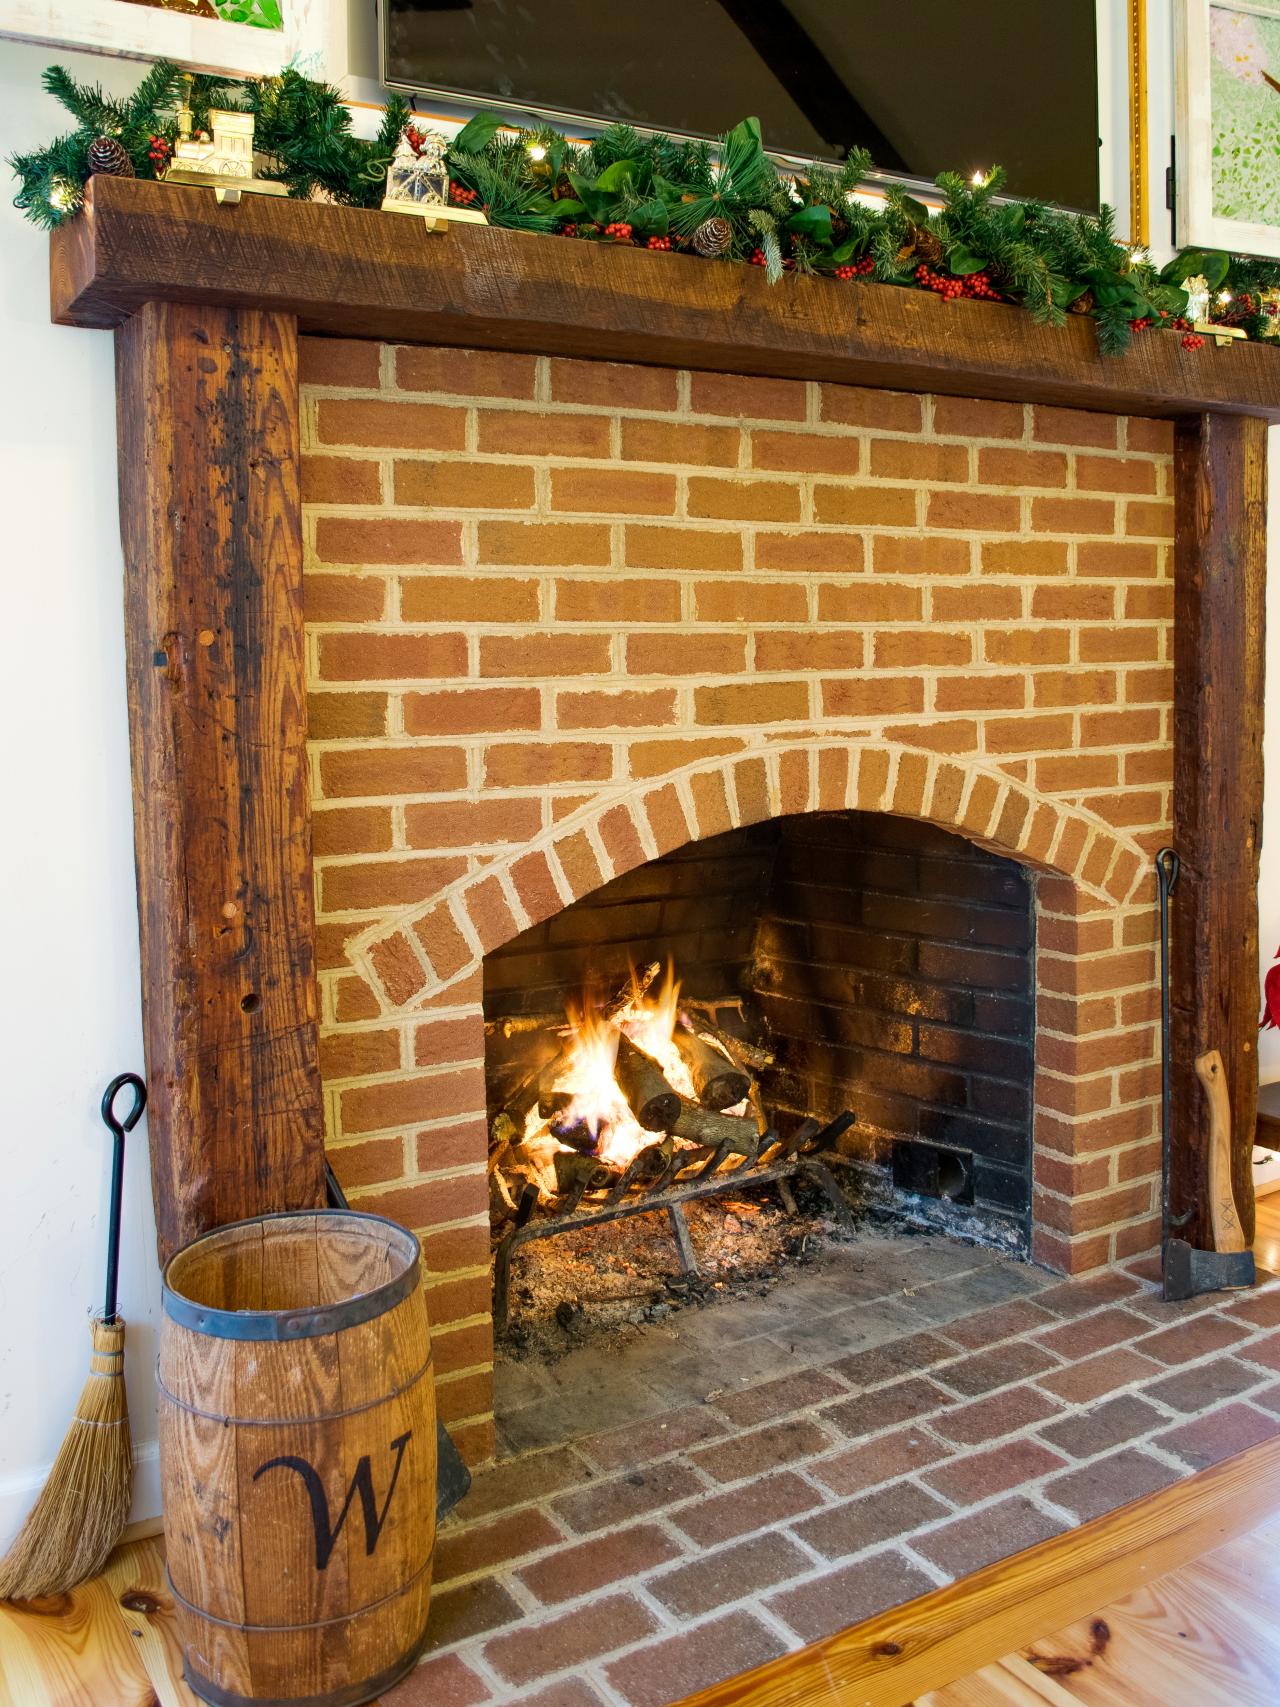 How to Build a Fireplace Mantel With Reclaimed Timbers | how-tos | DIY